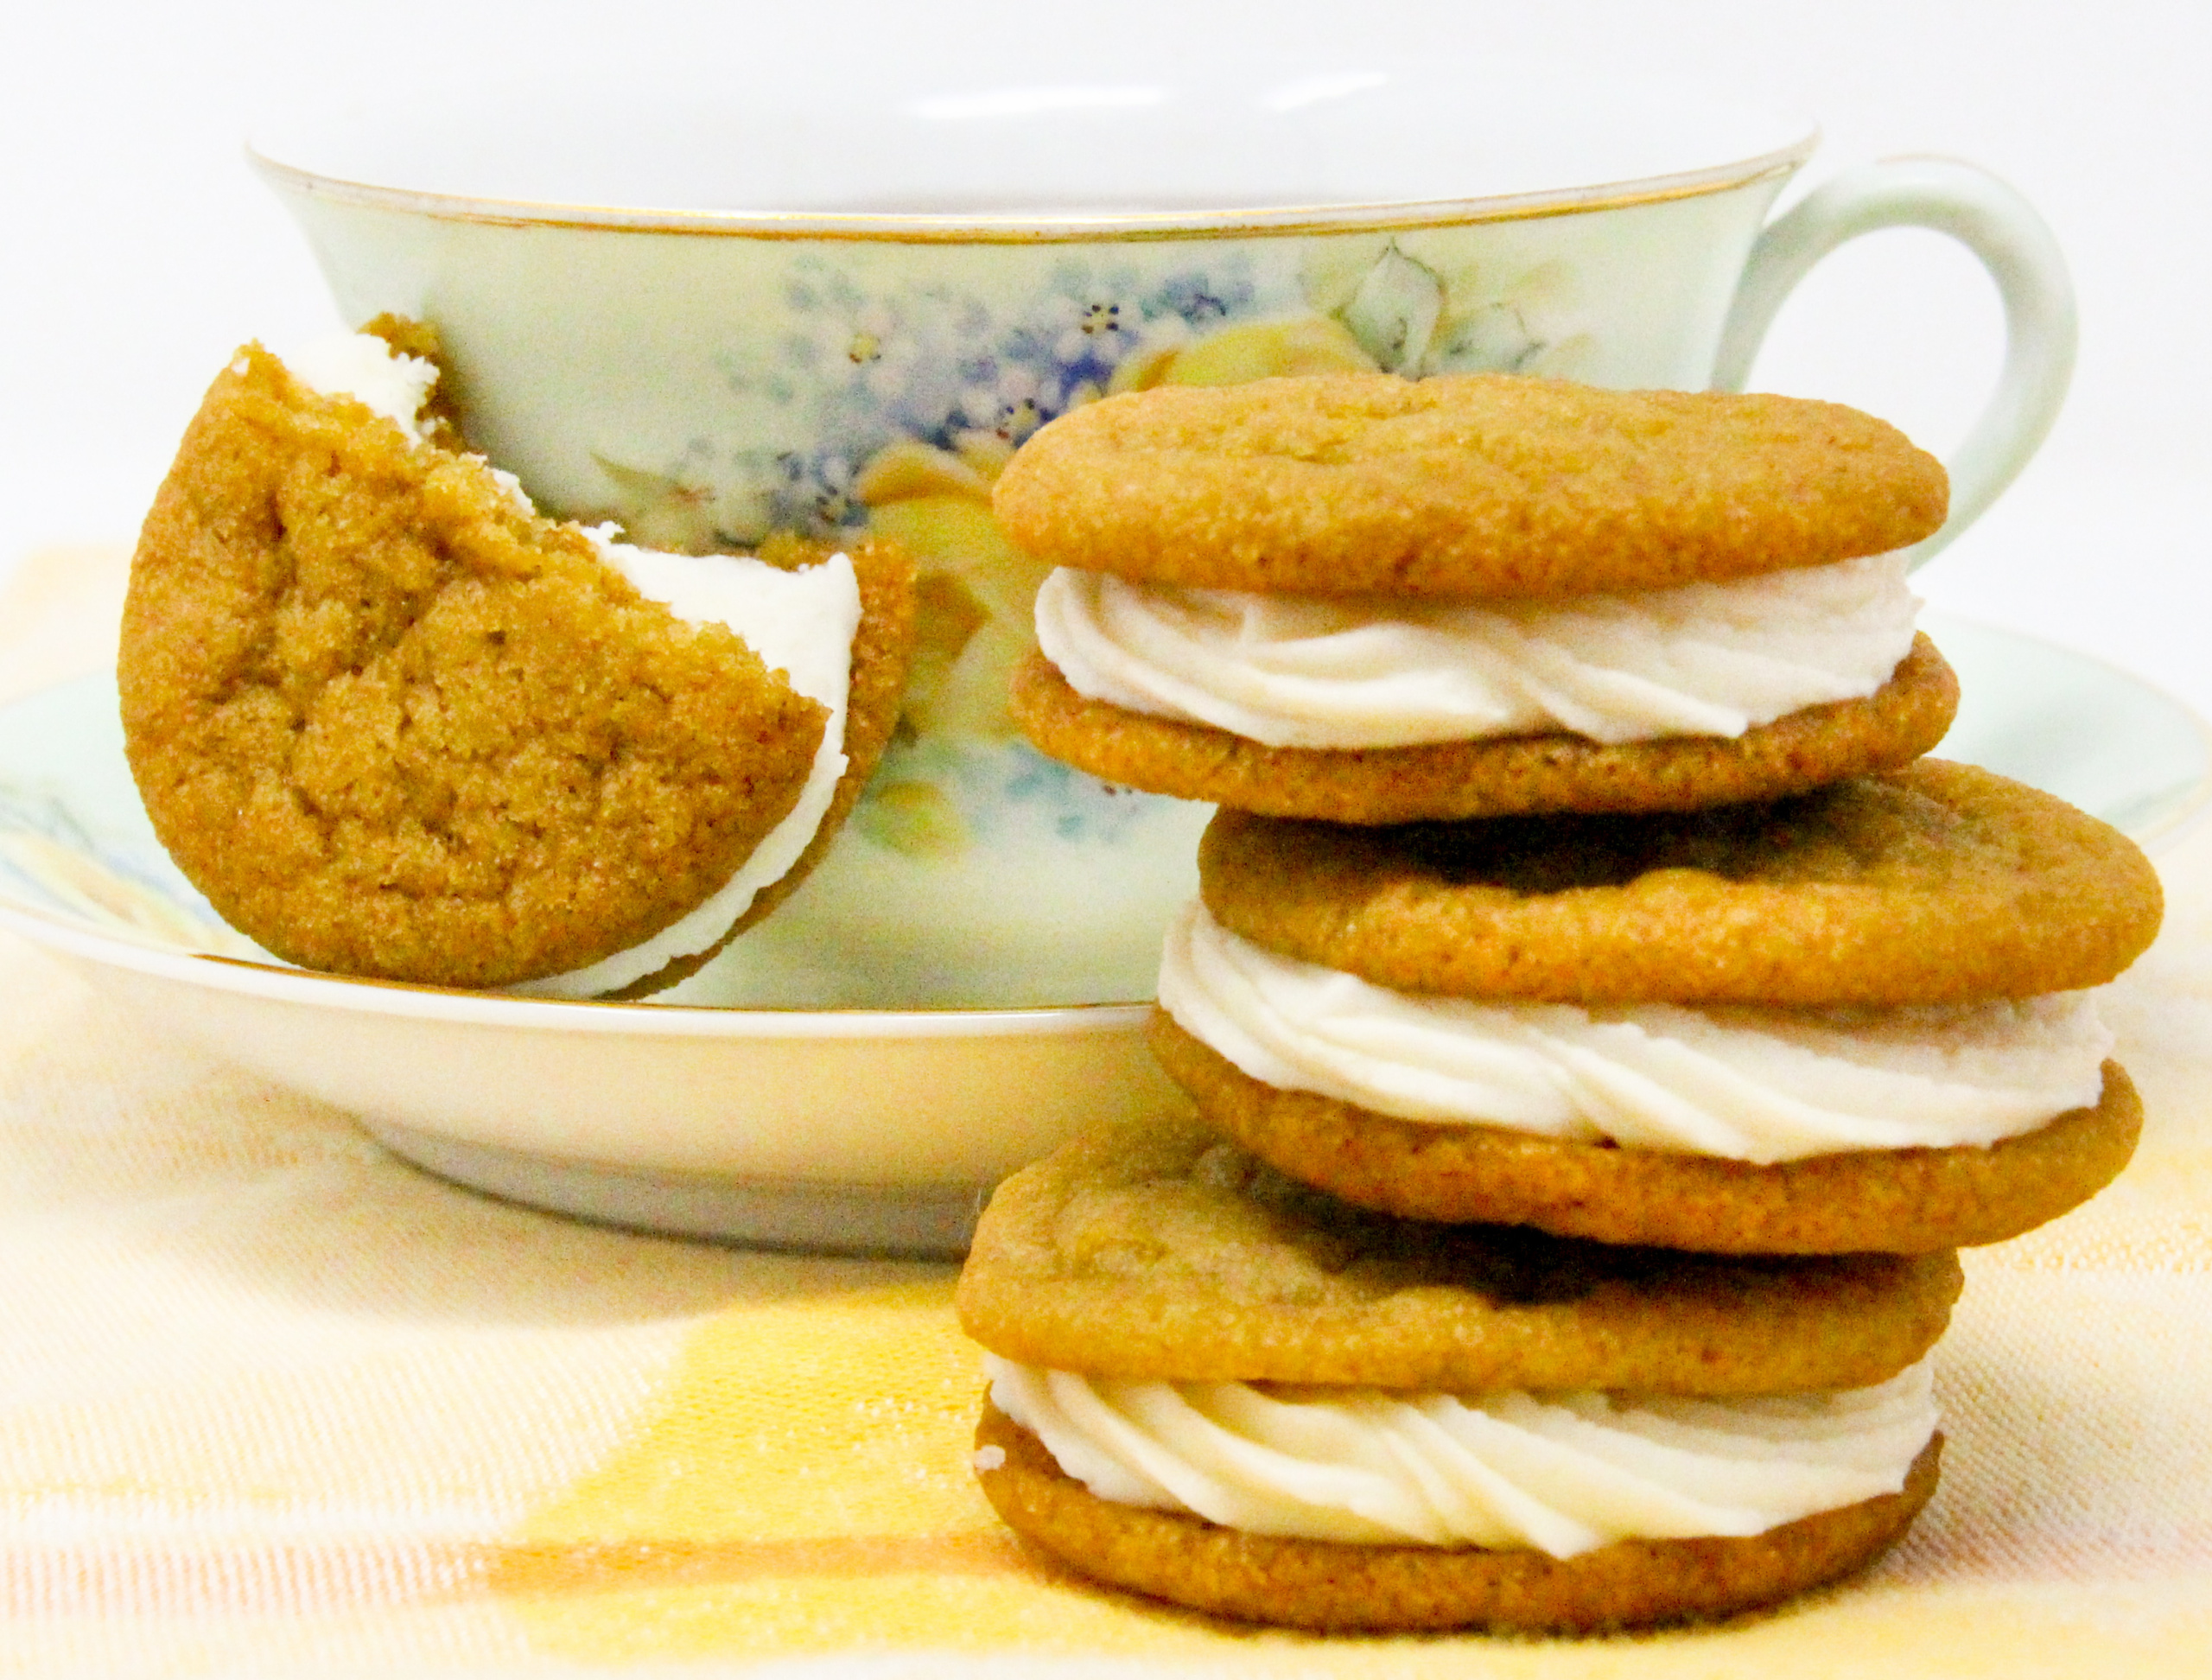 Chockful of flavor, these Lemon-Ginger Sandwich Cookies are a bit crunchy on the edges and soft and sweet on the insides. Perfection in each bite! Recipe shared with permission granted by Darci Hannah, author of MURDER AT THE CHRISTMAS COOKIE BAKE-OFF.